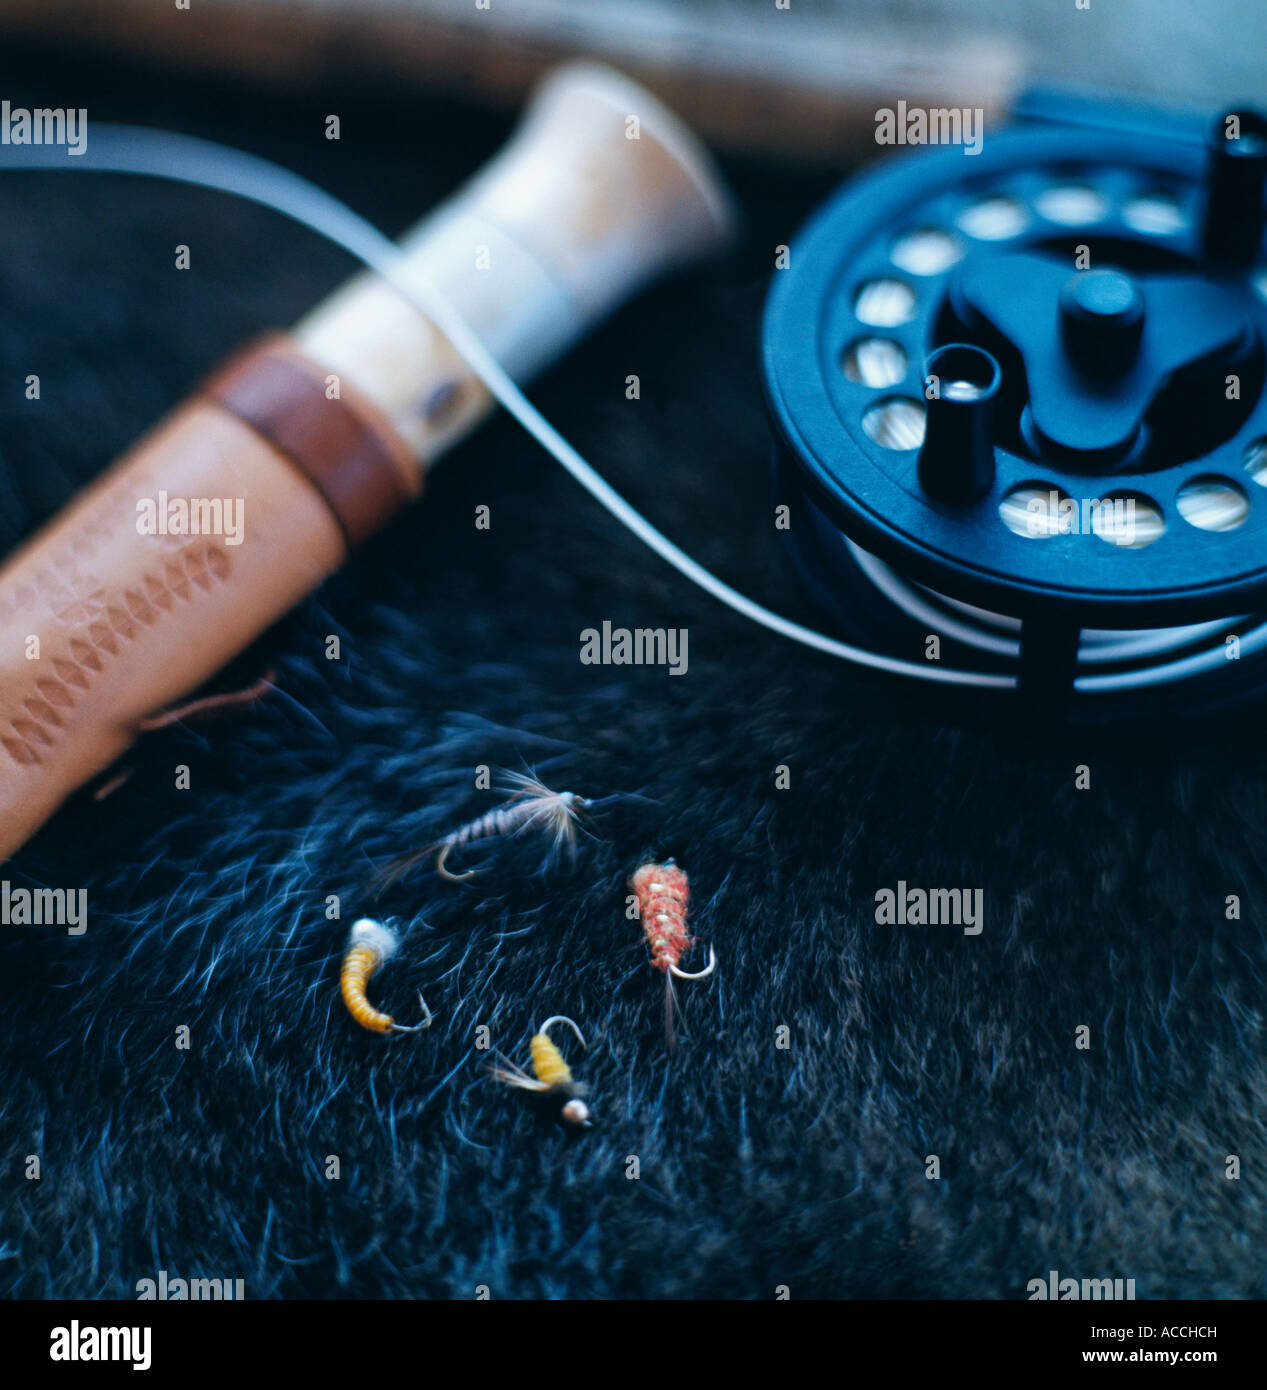 Details of fishing equipment close-up. Stock Photo